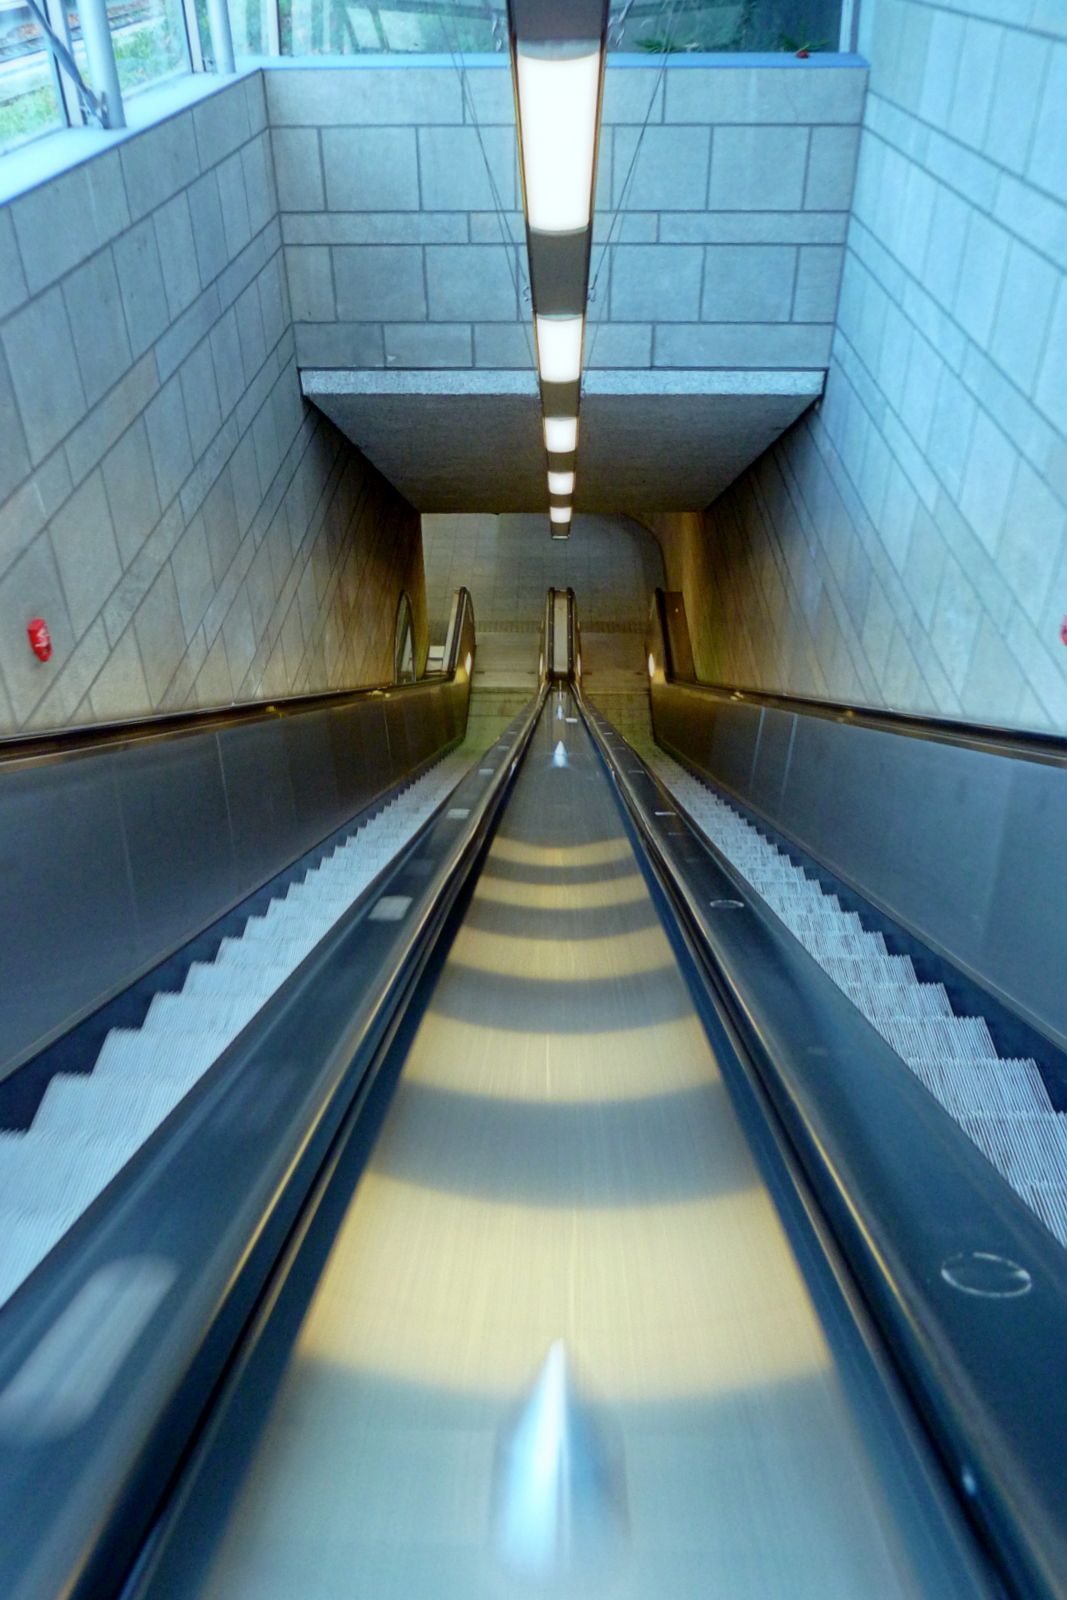 a person riding down a very long moving escalator